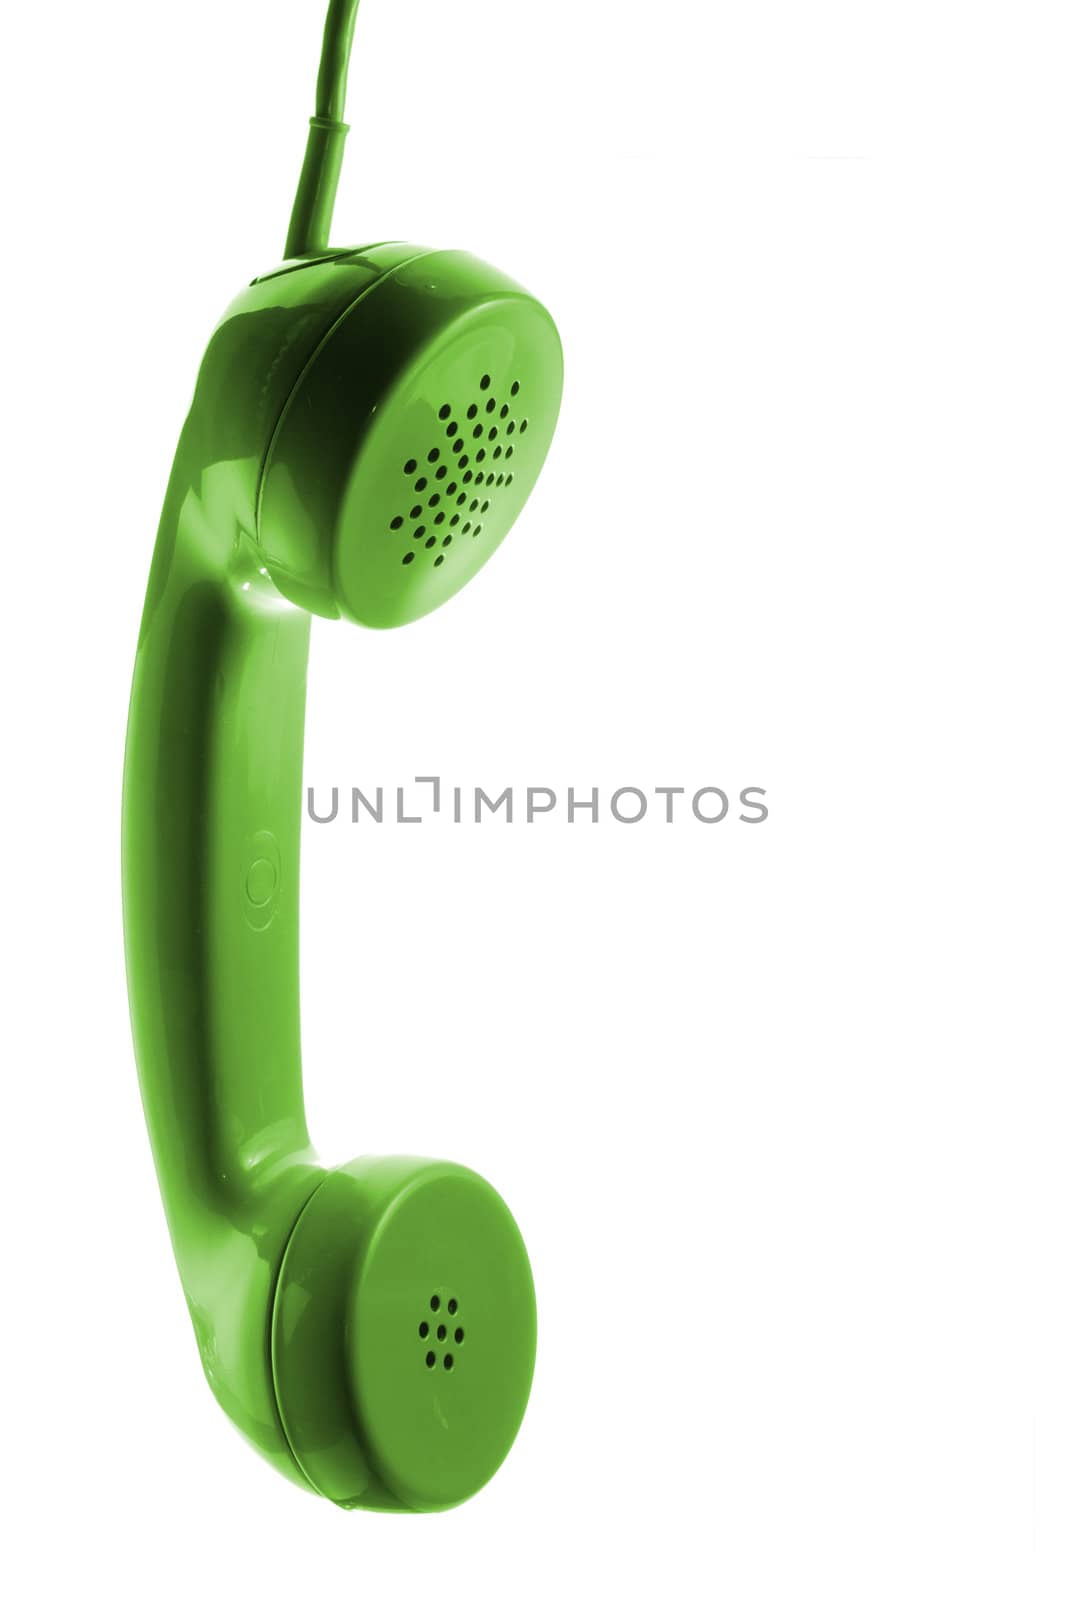 Green telephone isolated on white